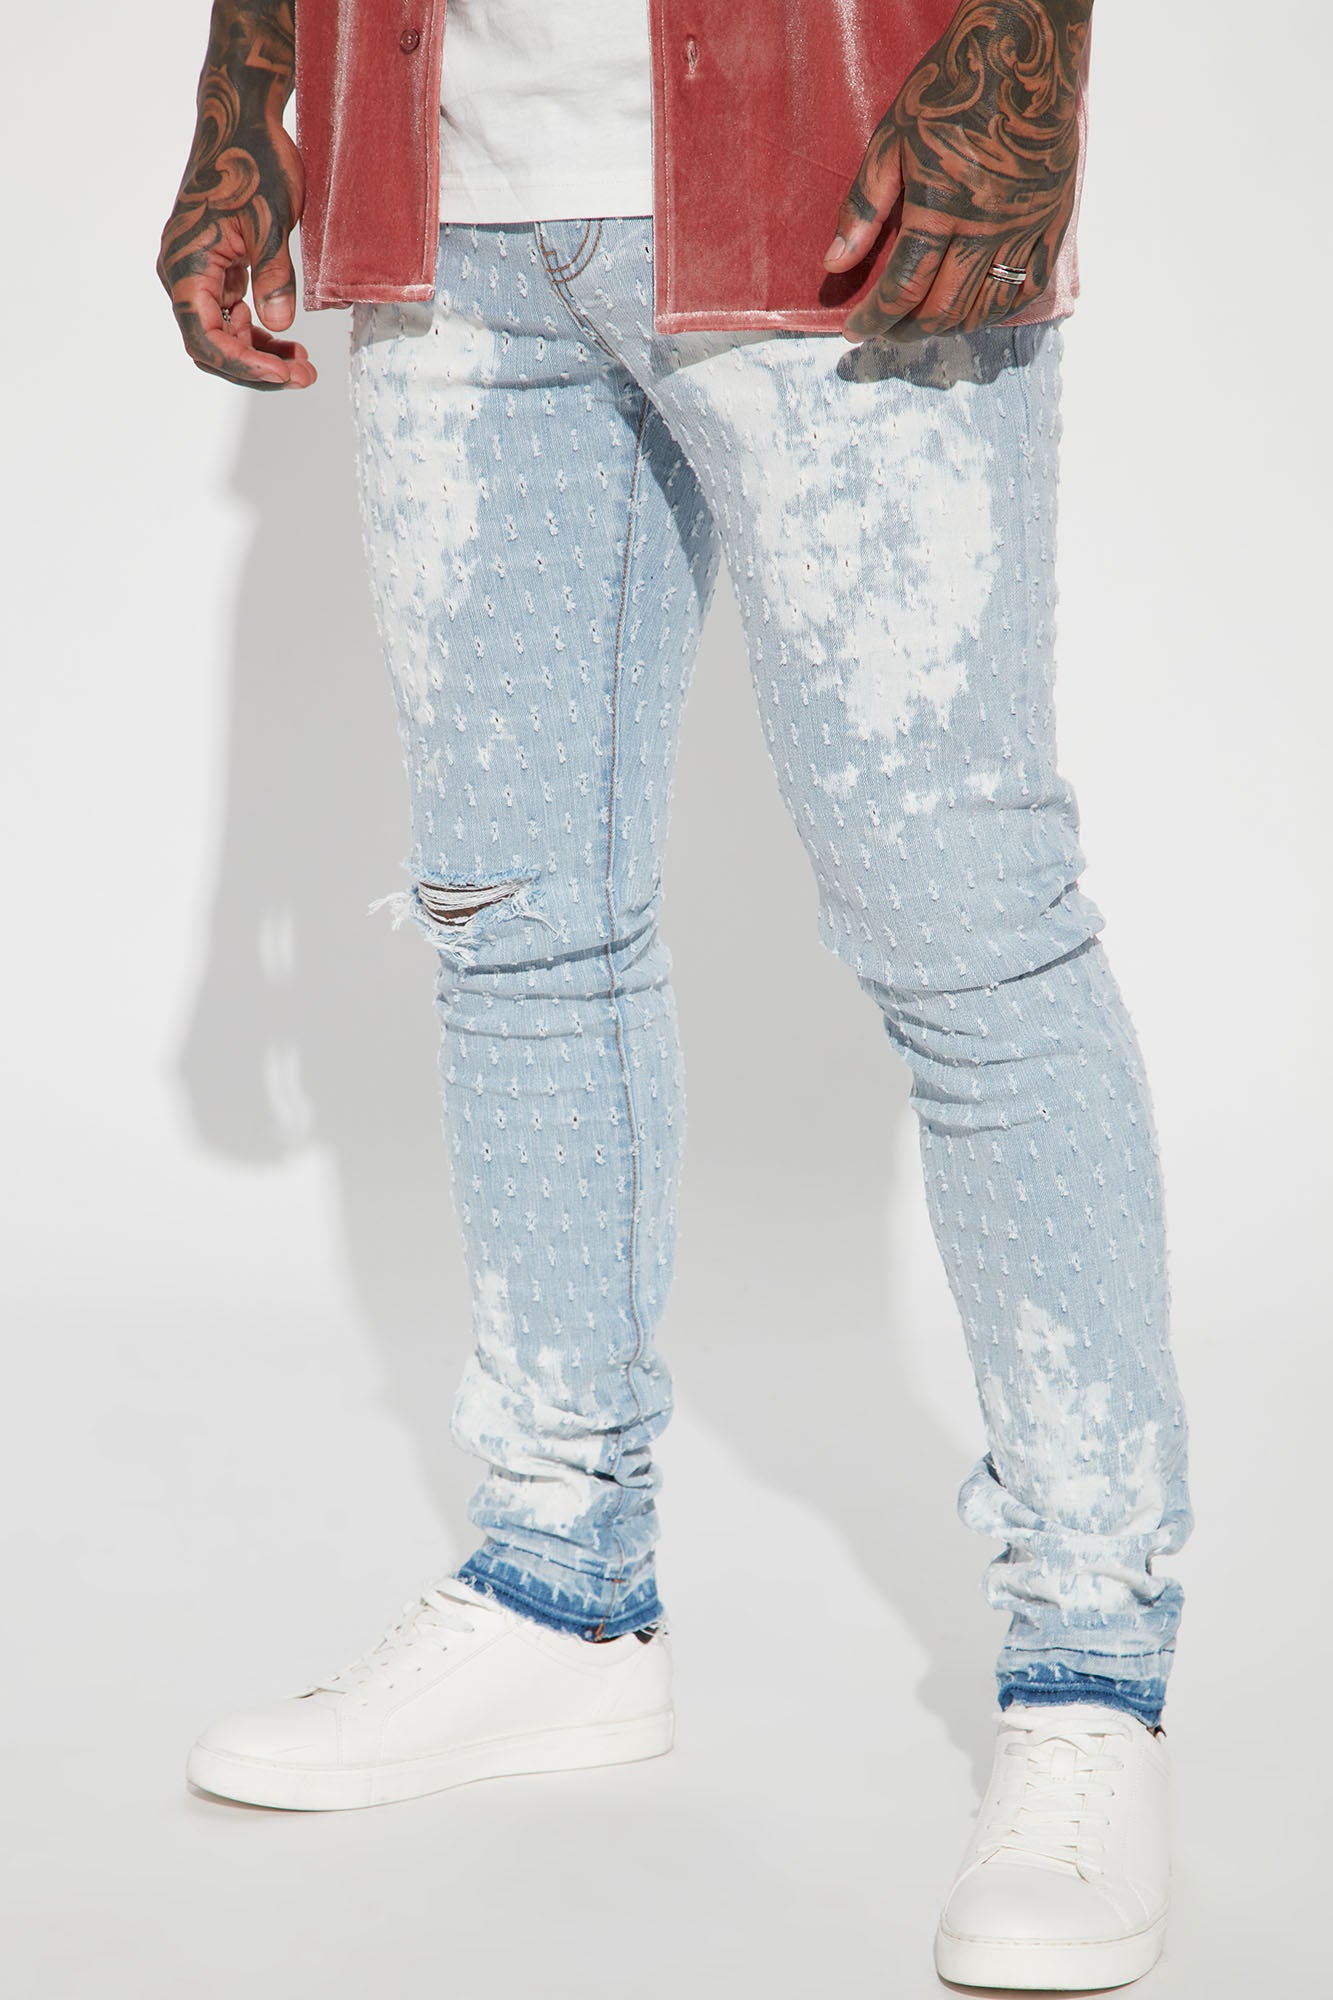 Bleach Spotted Ripped Knee Stacked Skinny Jeans - Light Wash